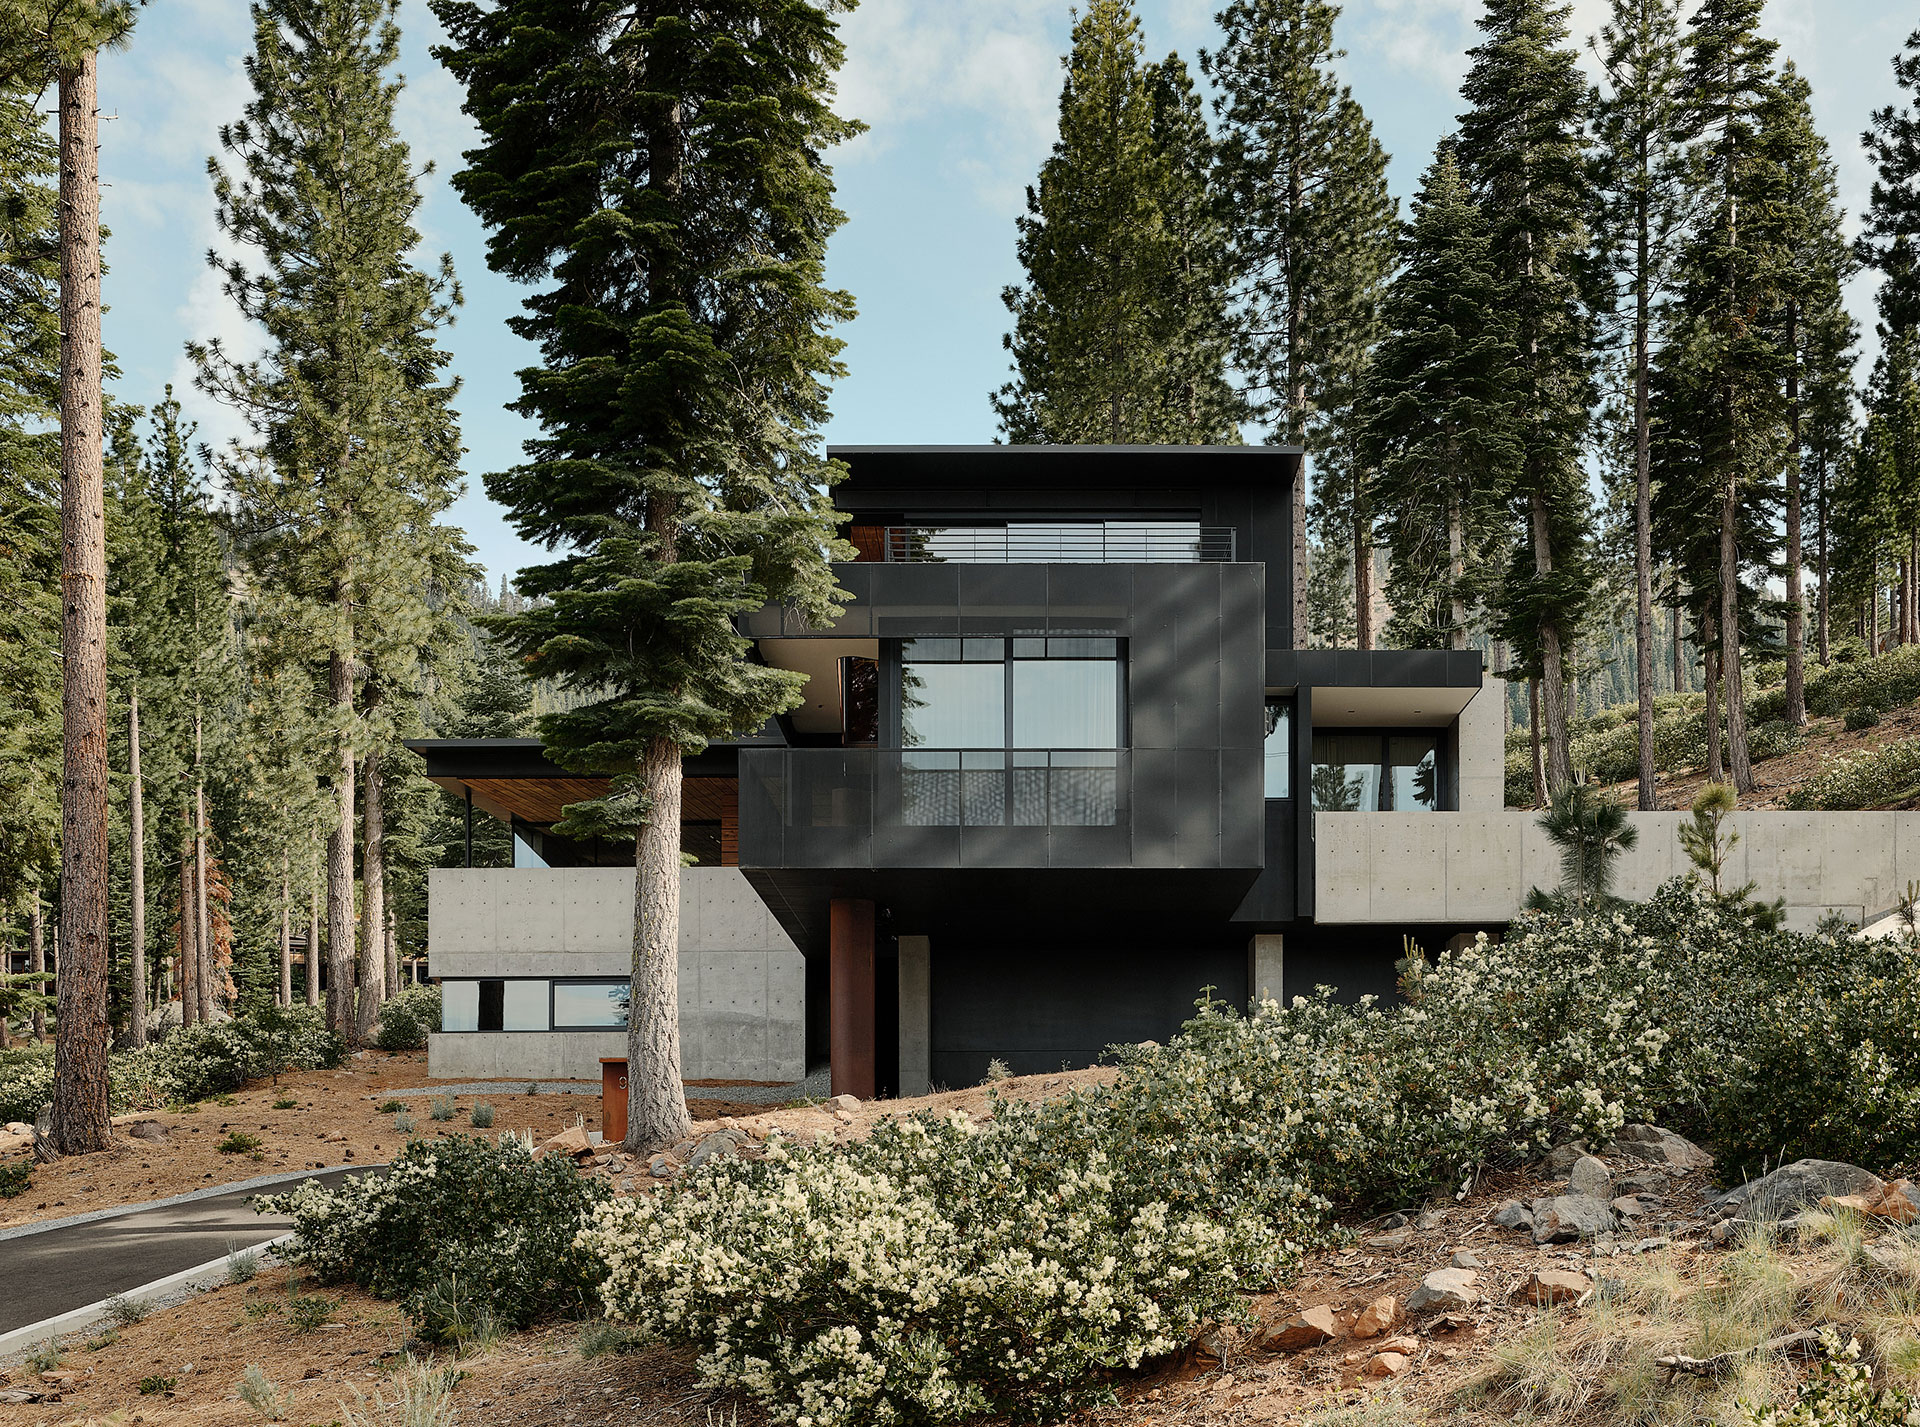 Lookout House by Faulkner Architects.
Photography by Joe Fletcher Photography.